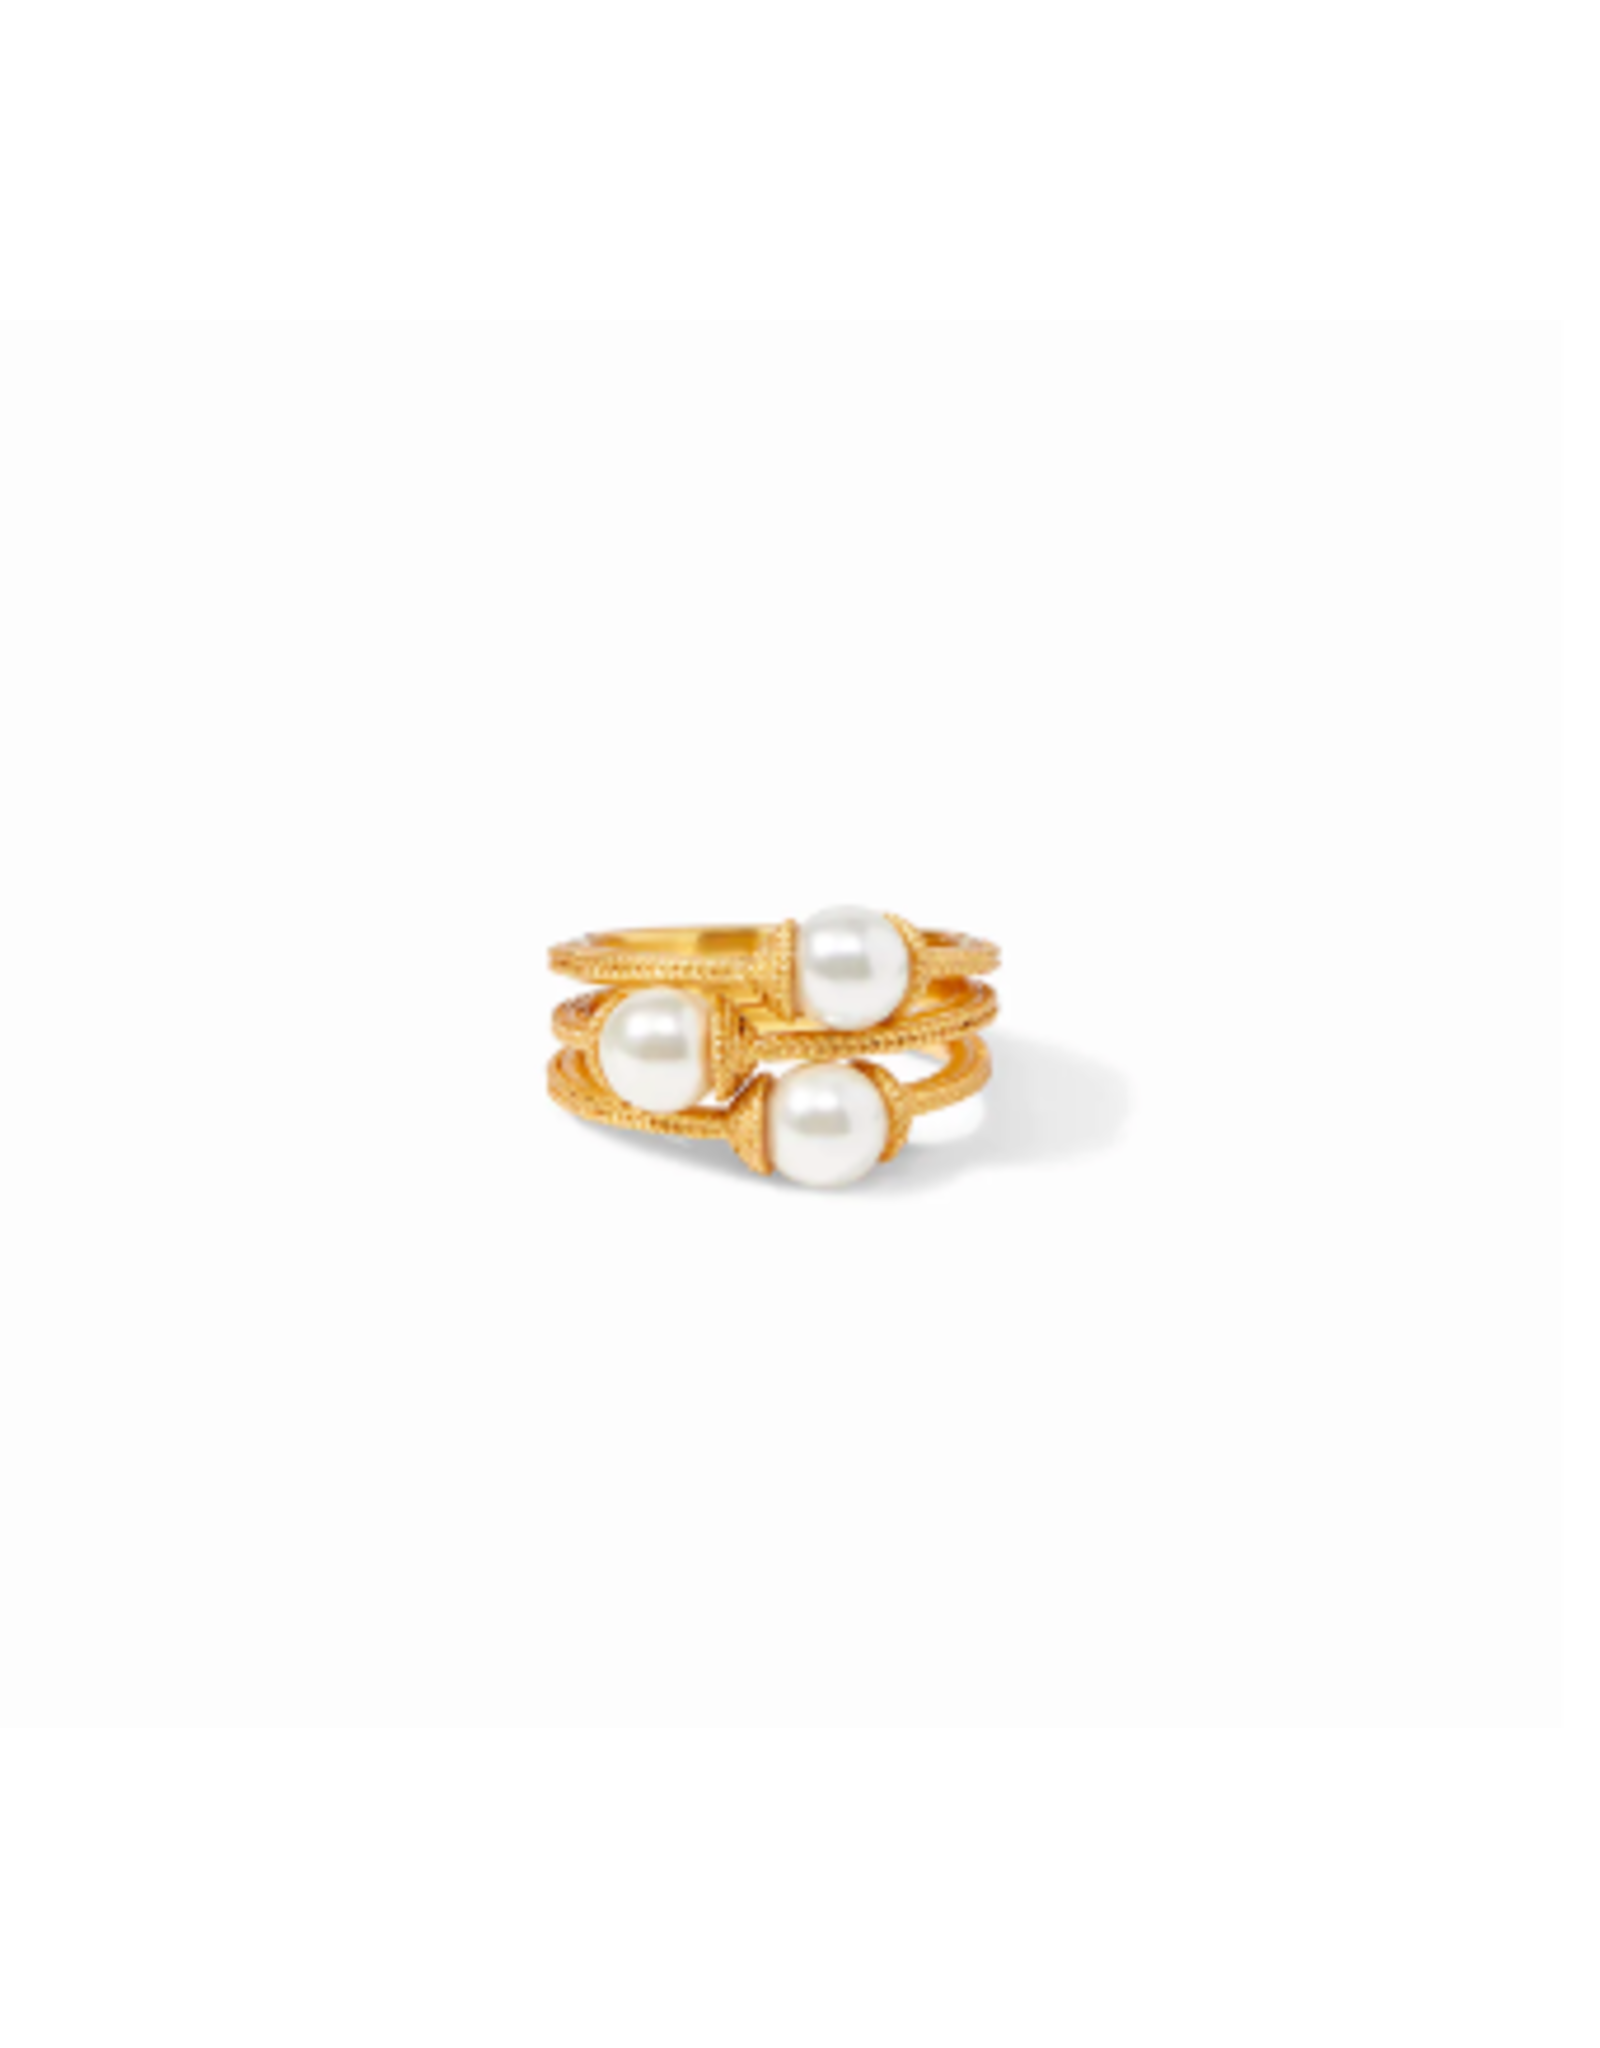 Julie Vos Calypso Trio Ring Gold/Pearl Set of 3,  Size 7 by Julie Vos